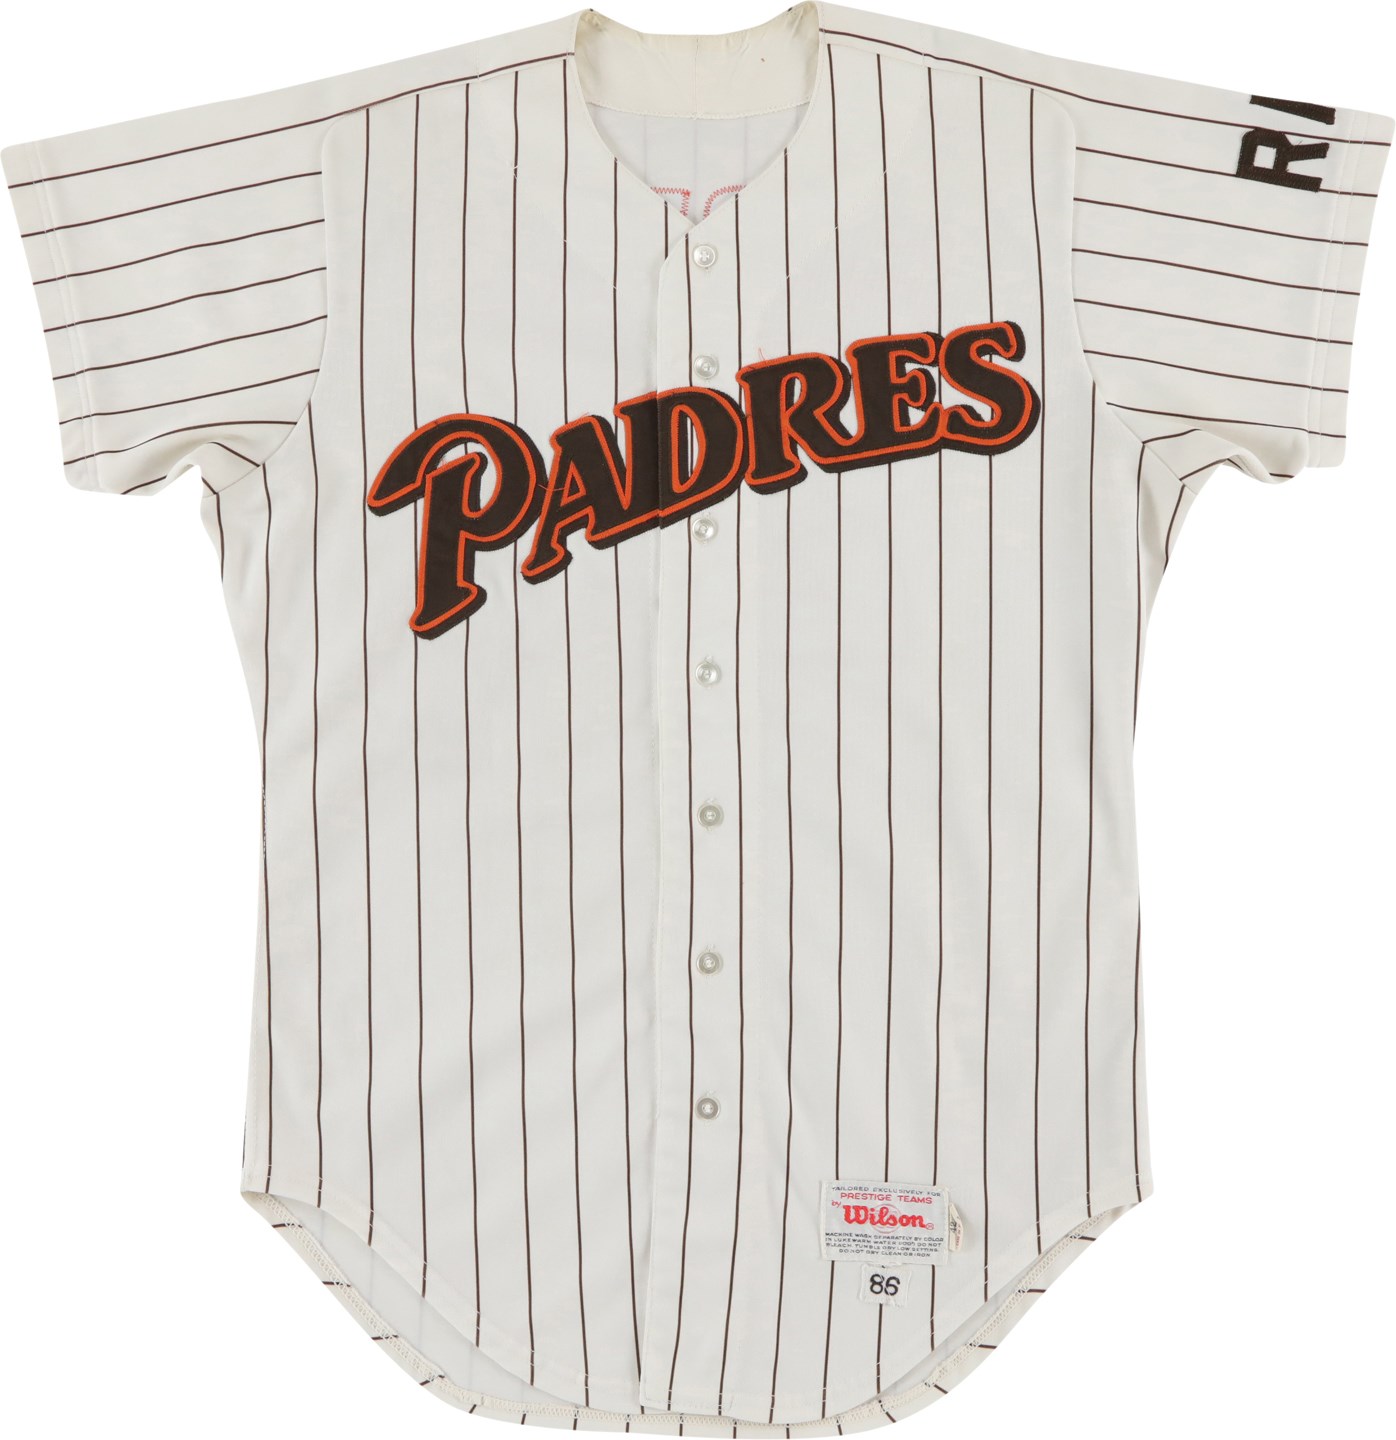 - 4/28/86 John Kruk Rookie 1st Stolen Base and Career Hit #6 San Diego Padres Game Worn Jersey (Photo-Matched)